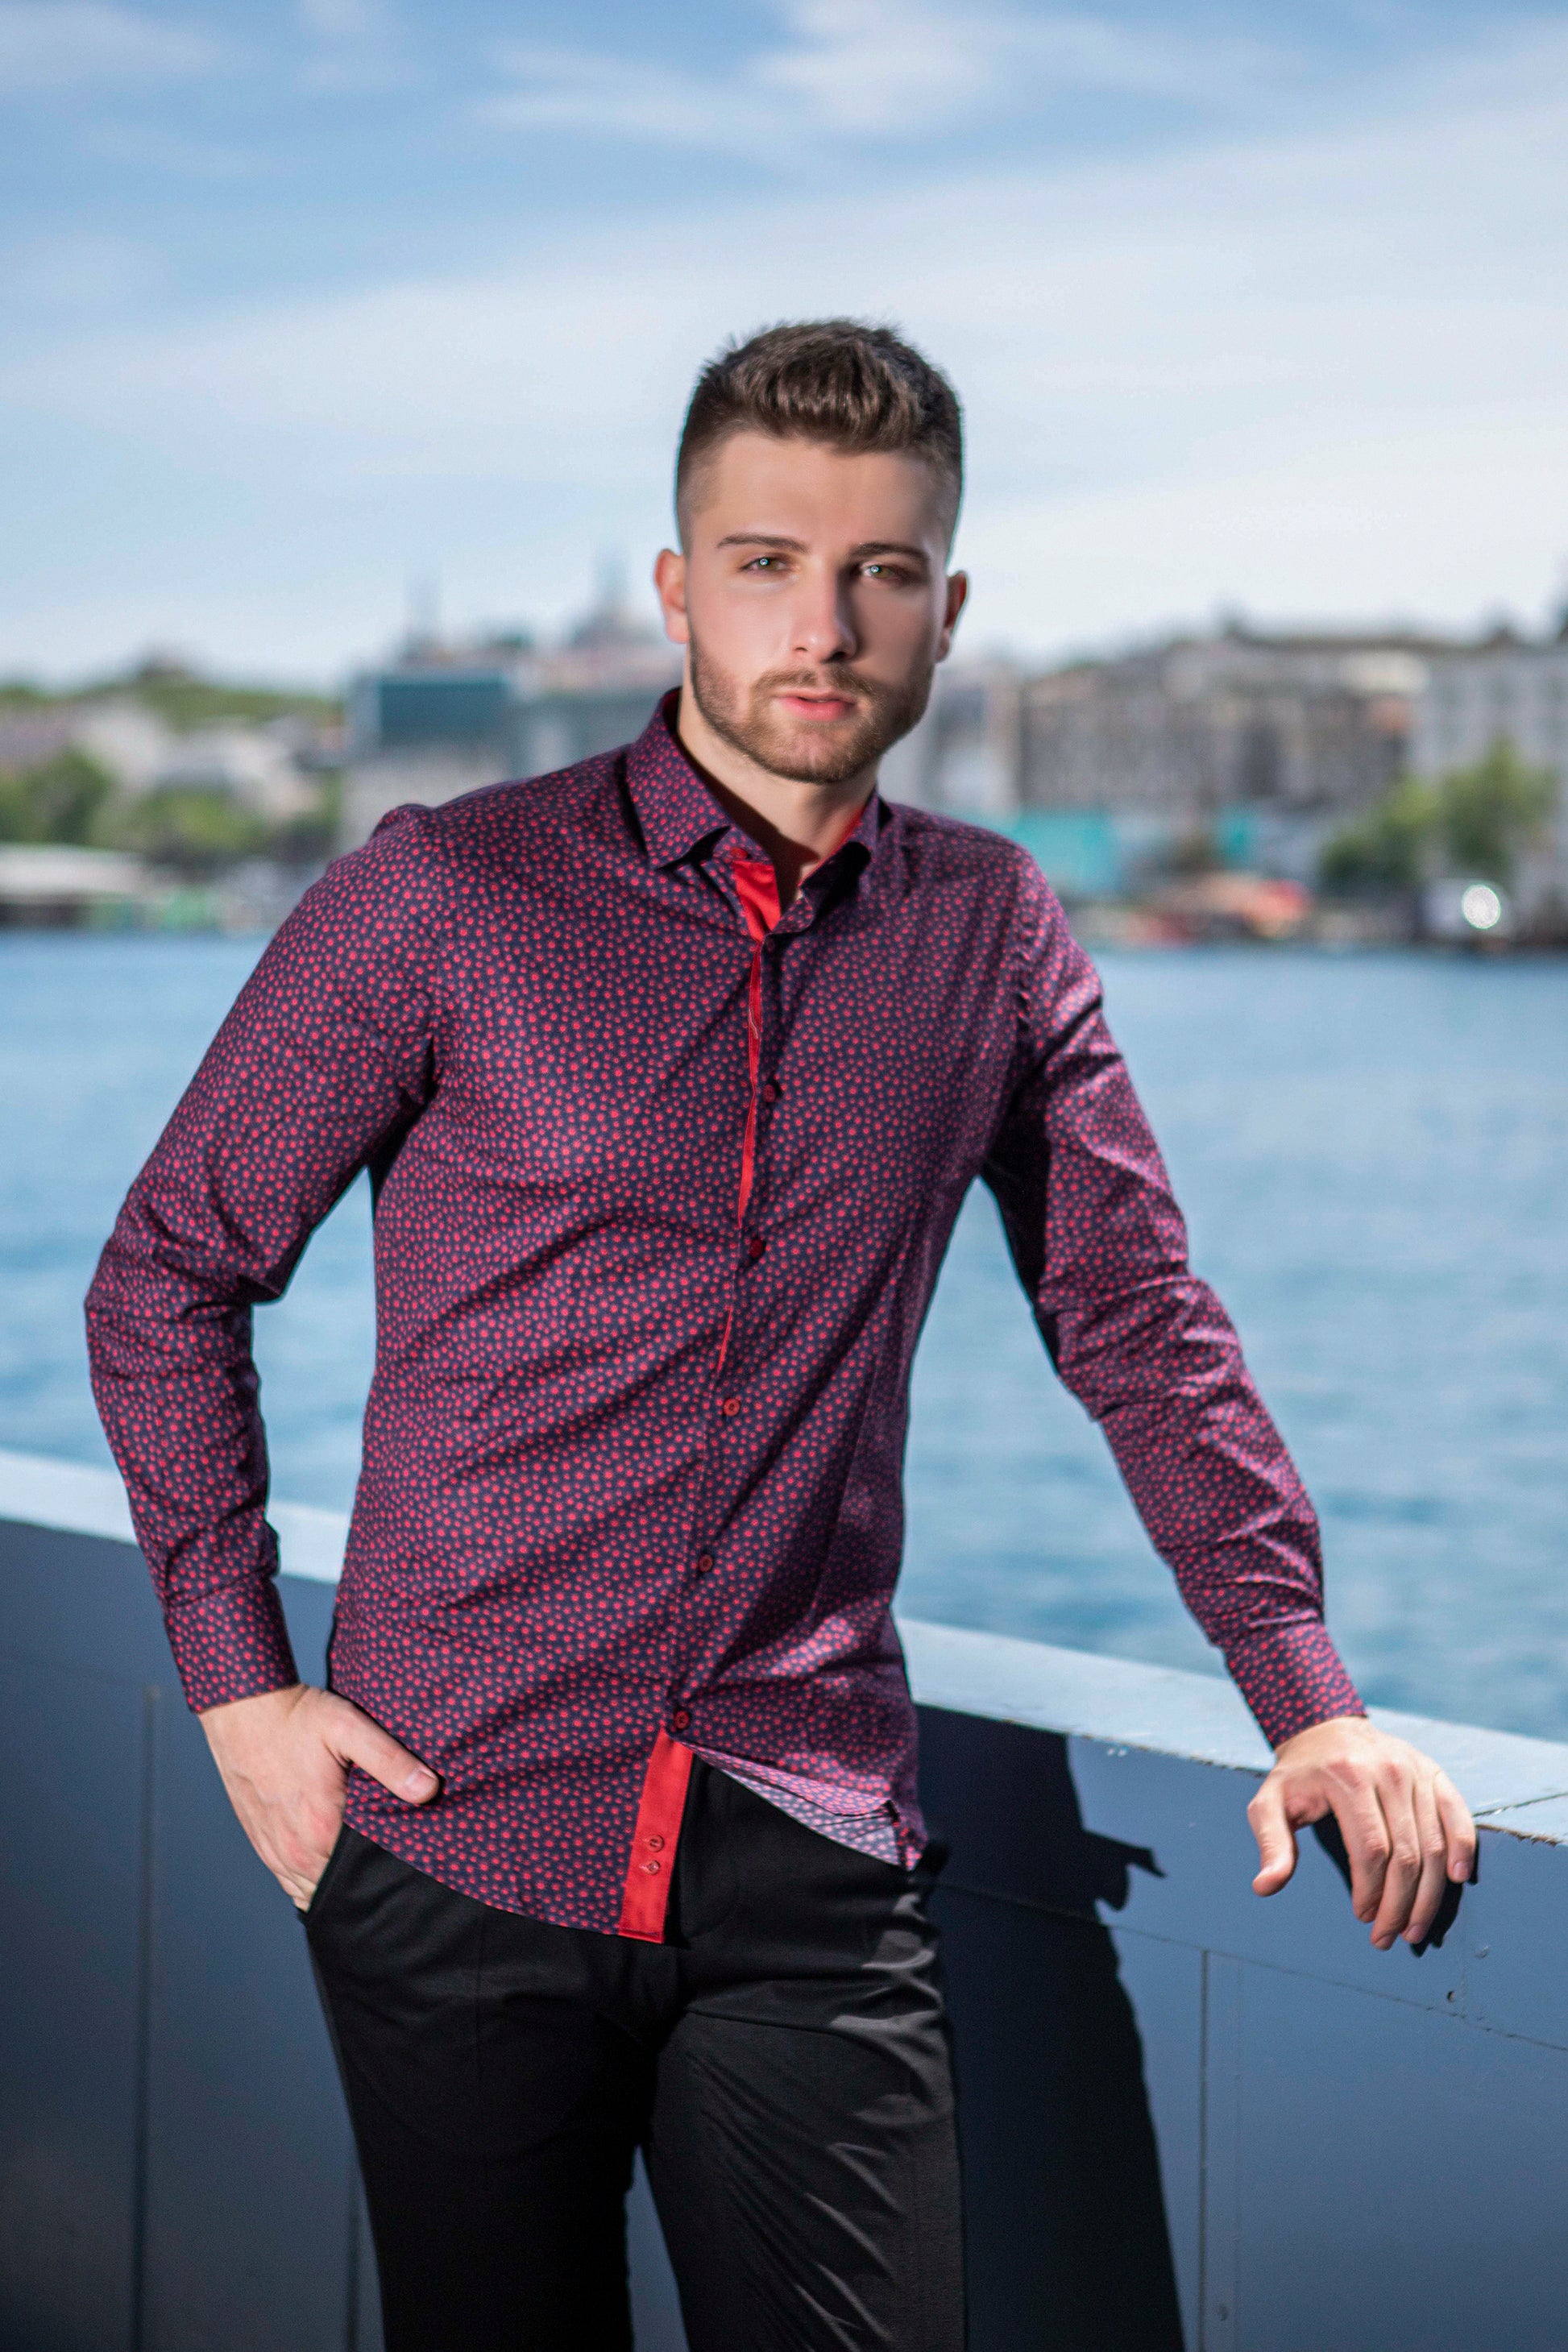 Slim, Star Design Dress Shirt with Red Stars Printed Over Solid Navy. 100% Cotton.